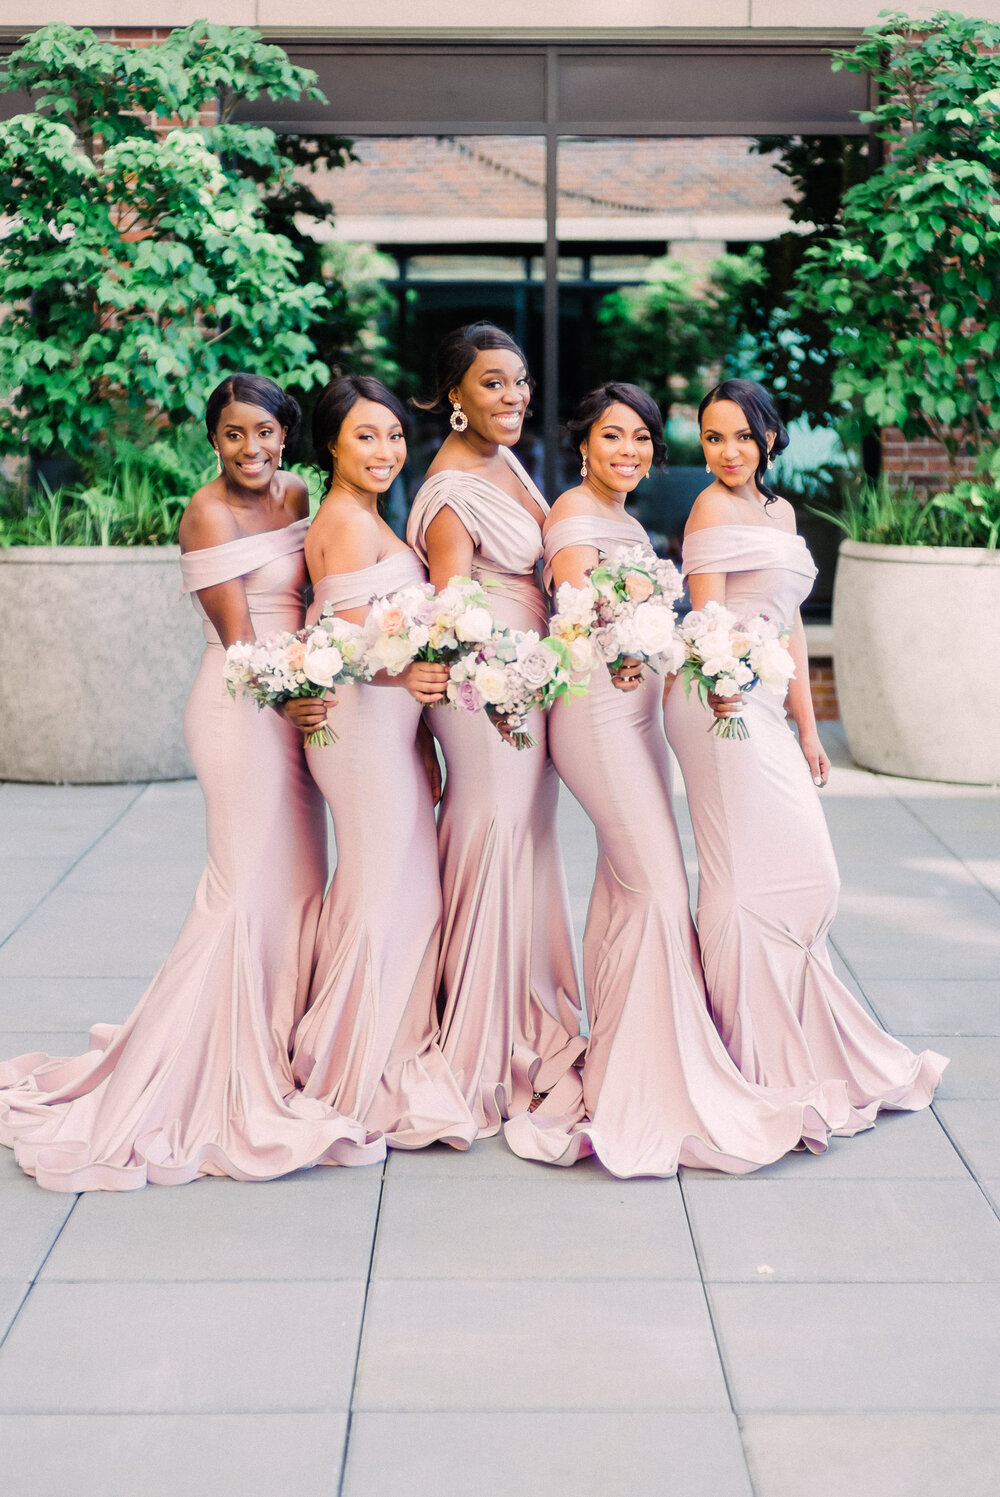 Bridesmaids Full Length Portrait with Bouquets